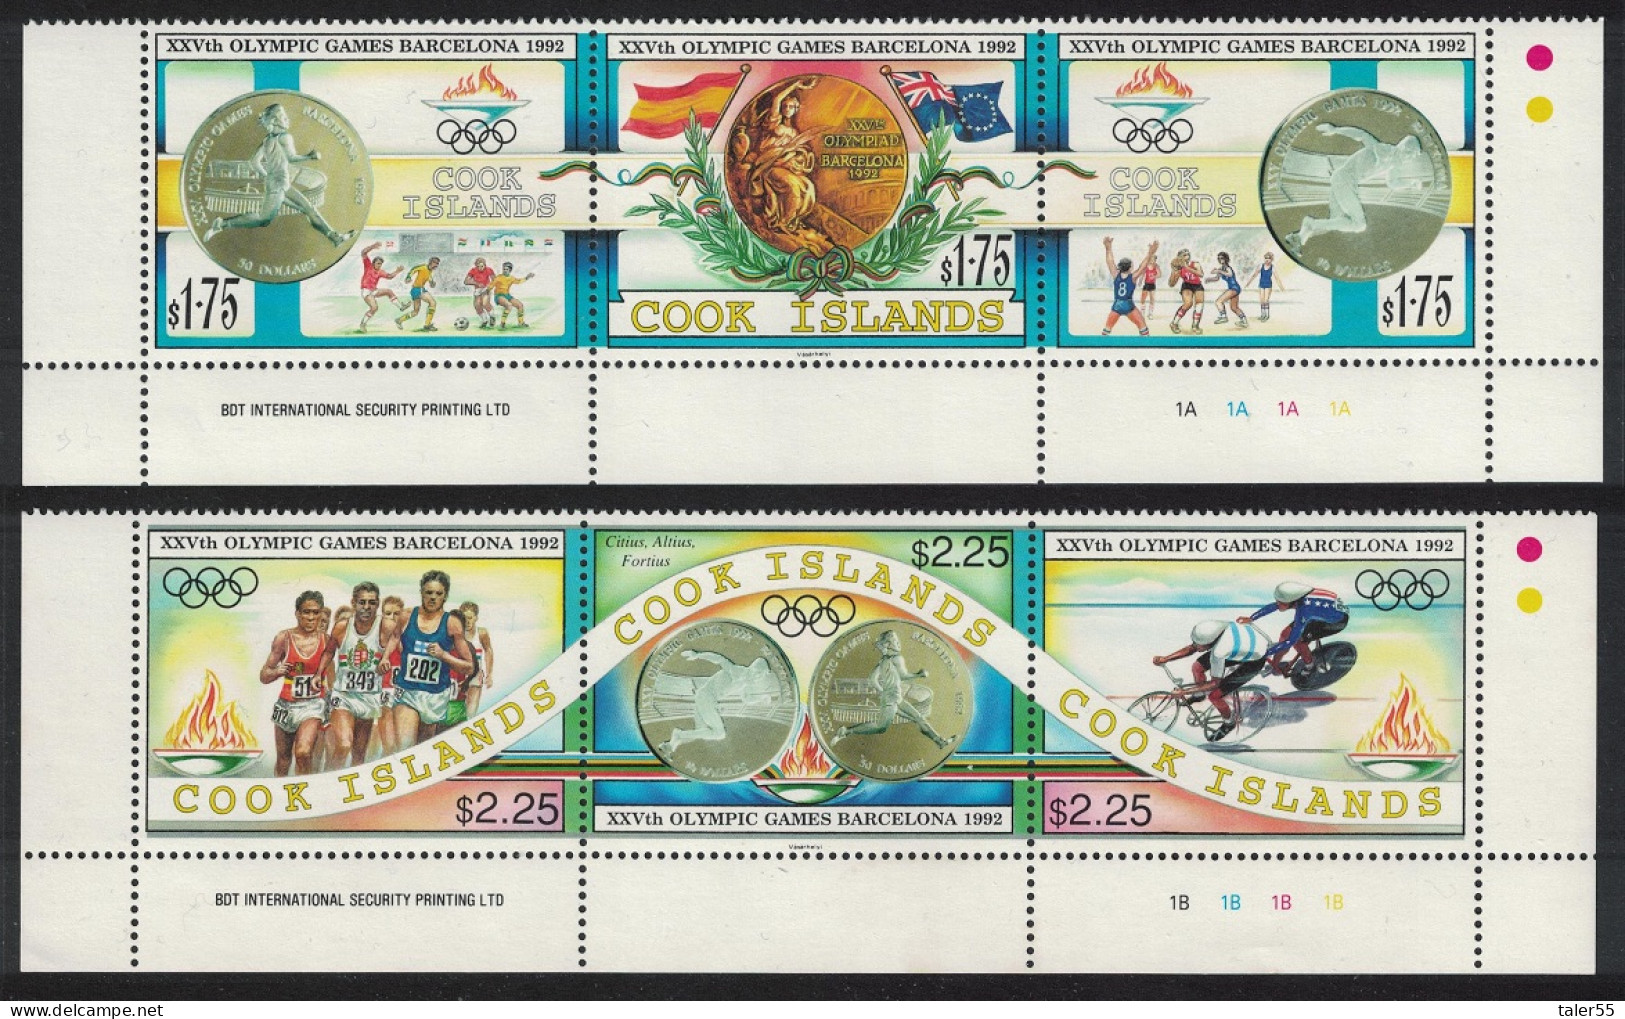 Cook Is. Football Olympic Games Barcelona 2 Strips Margins 1992 MNH SG#1304-1309 Sc#1108-1109 - Islas Cook